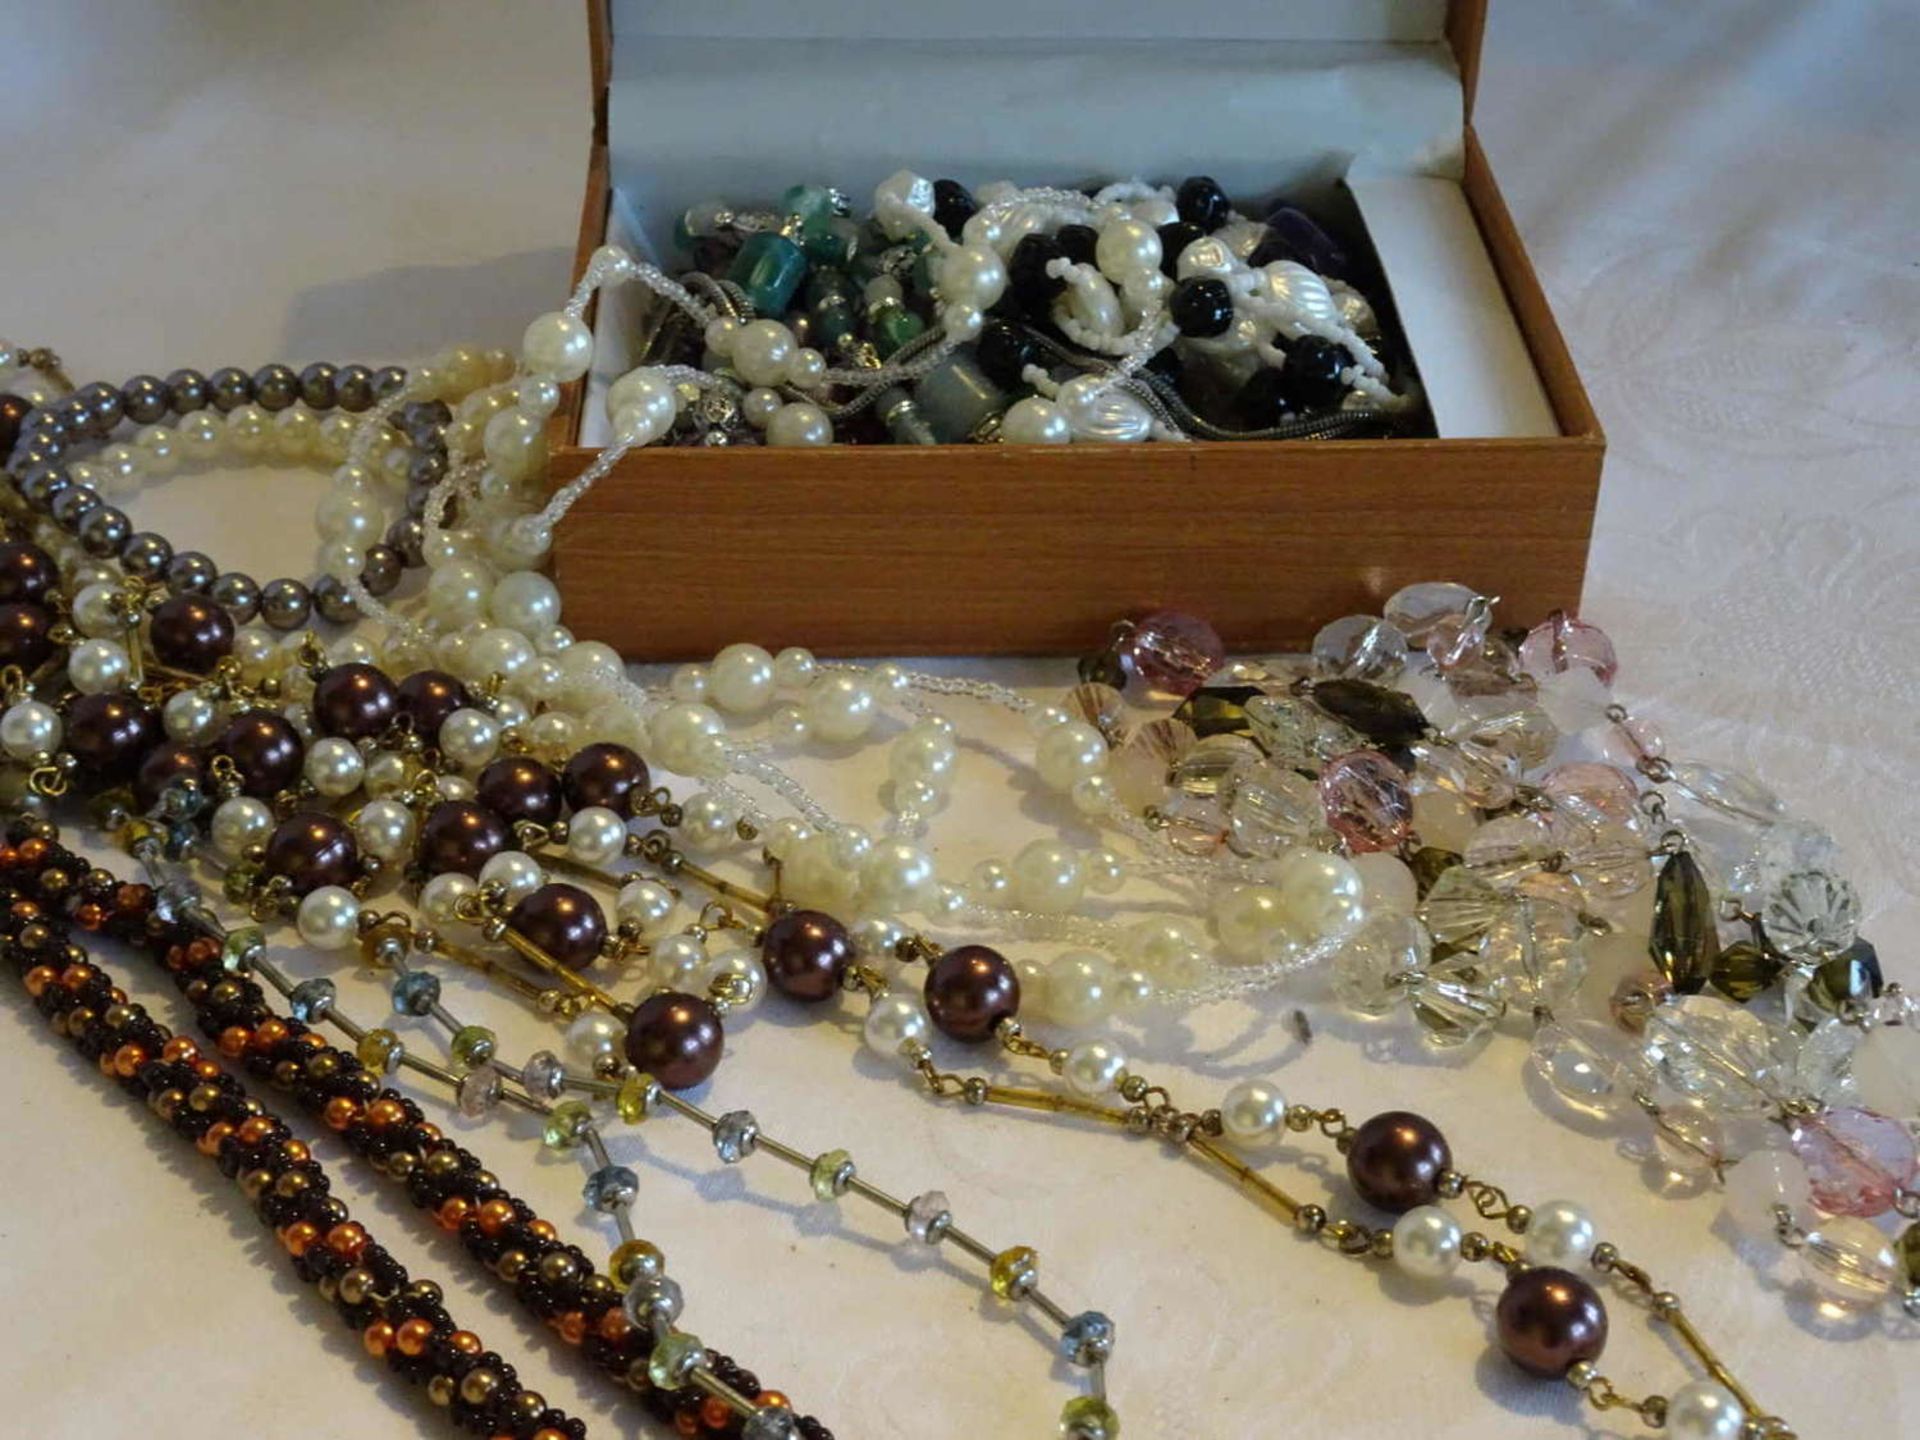 Lot of costume jewelry from household dissolution. Please visit!